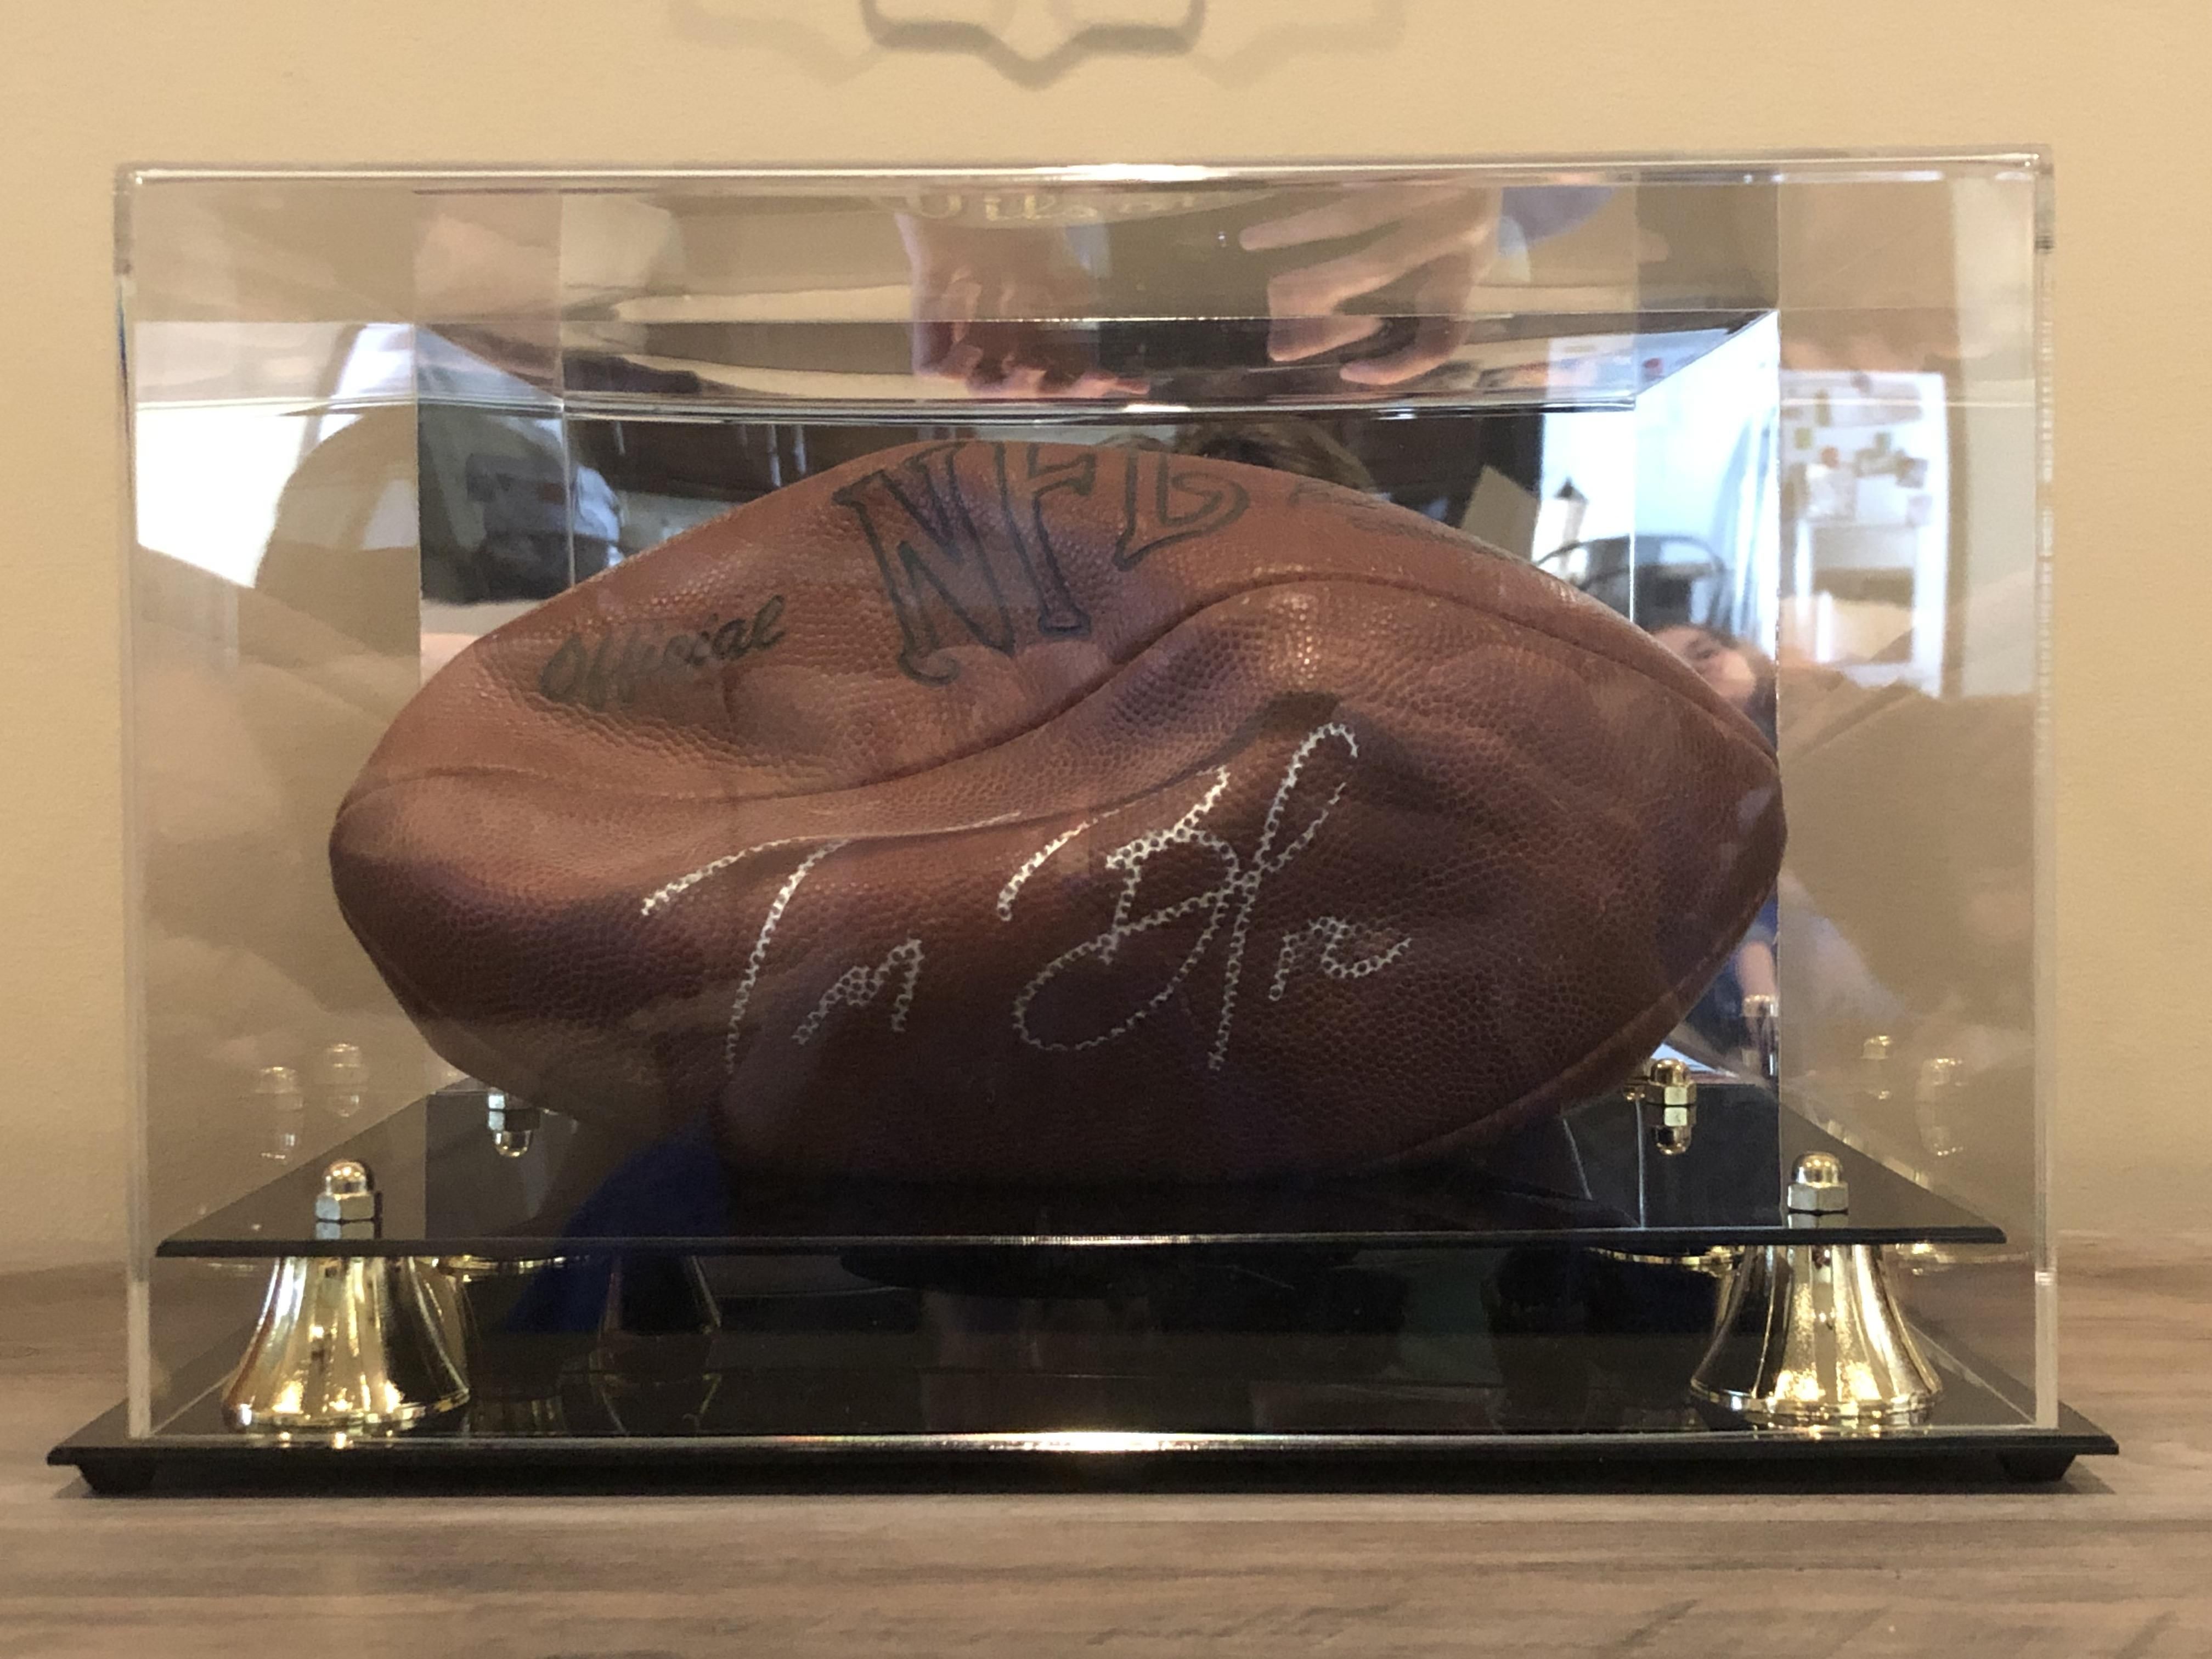 This signed Tom Brady football is about 15 years old. After deflate gate I just couldn’t bring myself to pump it back up. Too perfect.